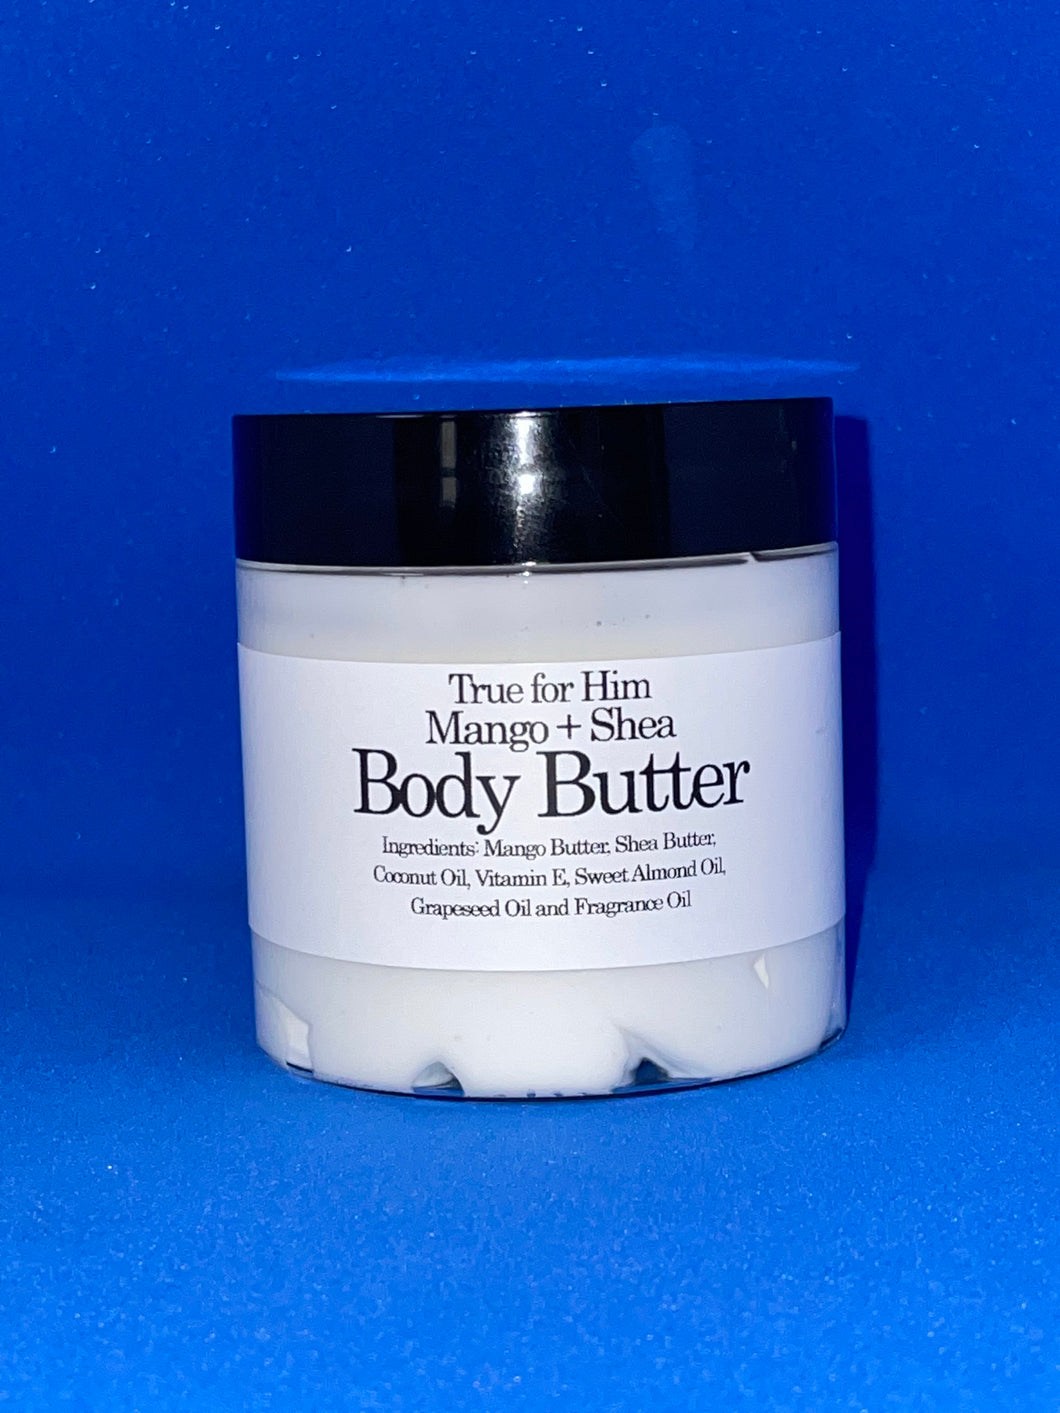 True for Him Body Butter